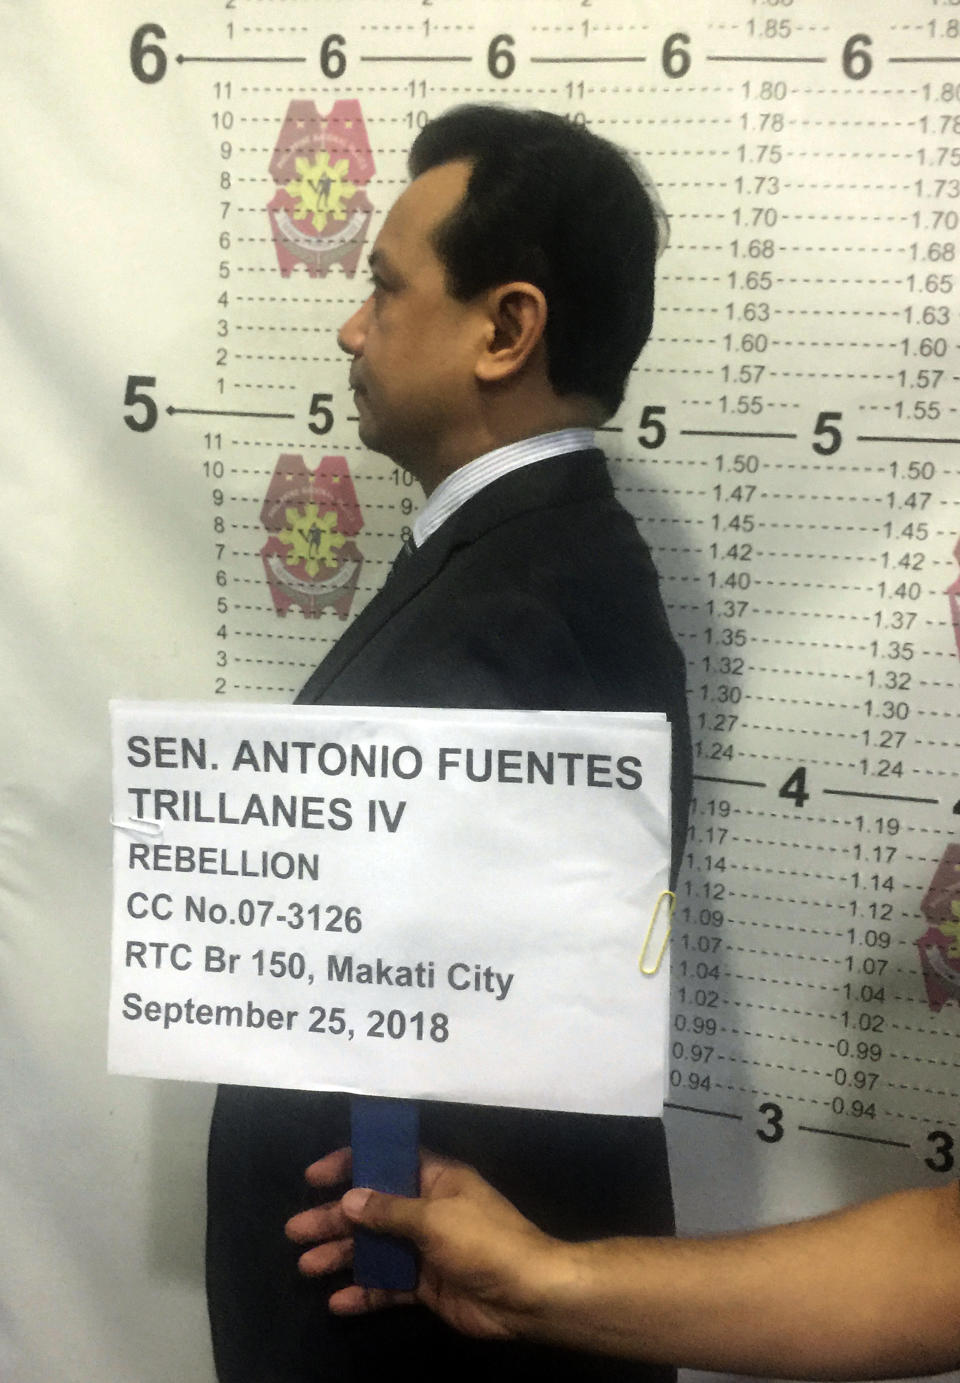 In this photo provided by the Philippine National Police Makati, Philippine opposition Sen. Antonio Trillanes IV for his mugshot inside a police station in Makati, metropolitan Manila after the Makati Regional Trial Court Branch 150 issued an order for his arrest Tuesday, Sept. 25, 2018. A Philippine court ordered Trillanes arrested Tuesday after the president revoked the senator's 2011 amnesty for a failed coup attempt and revived rebellion charges against him in an unprecedented legal move the legislator called a blow to democracy. Trillanes later posted bail. (Philippine National Police Makati via AP)